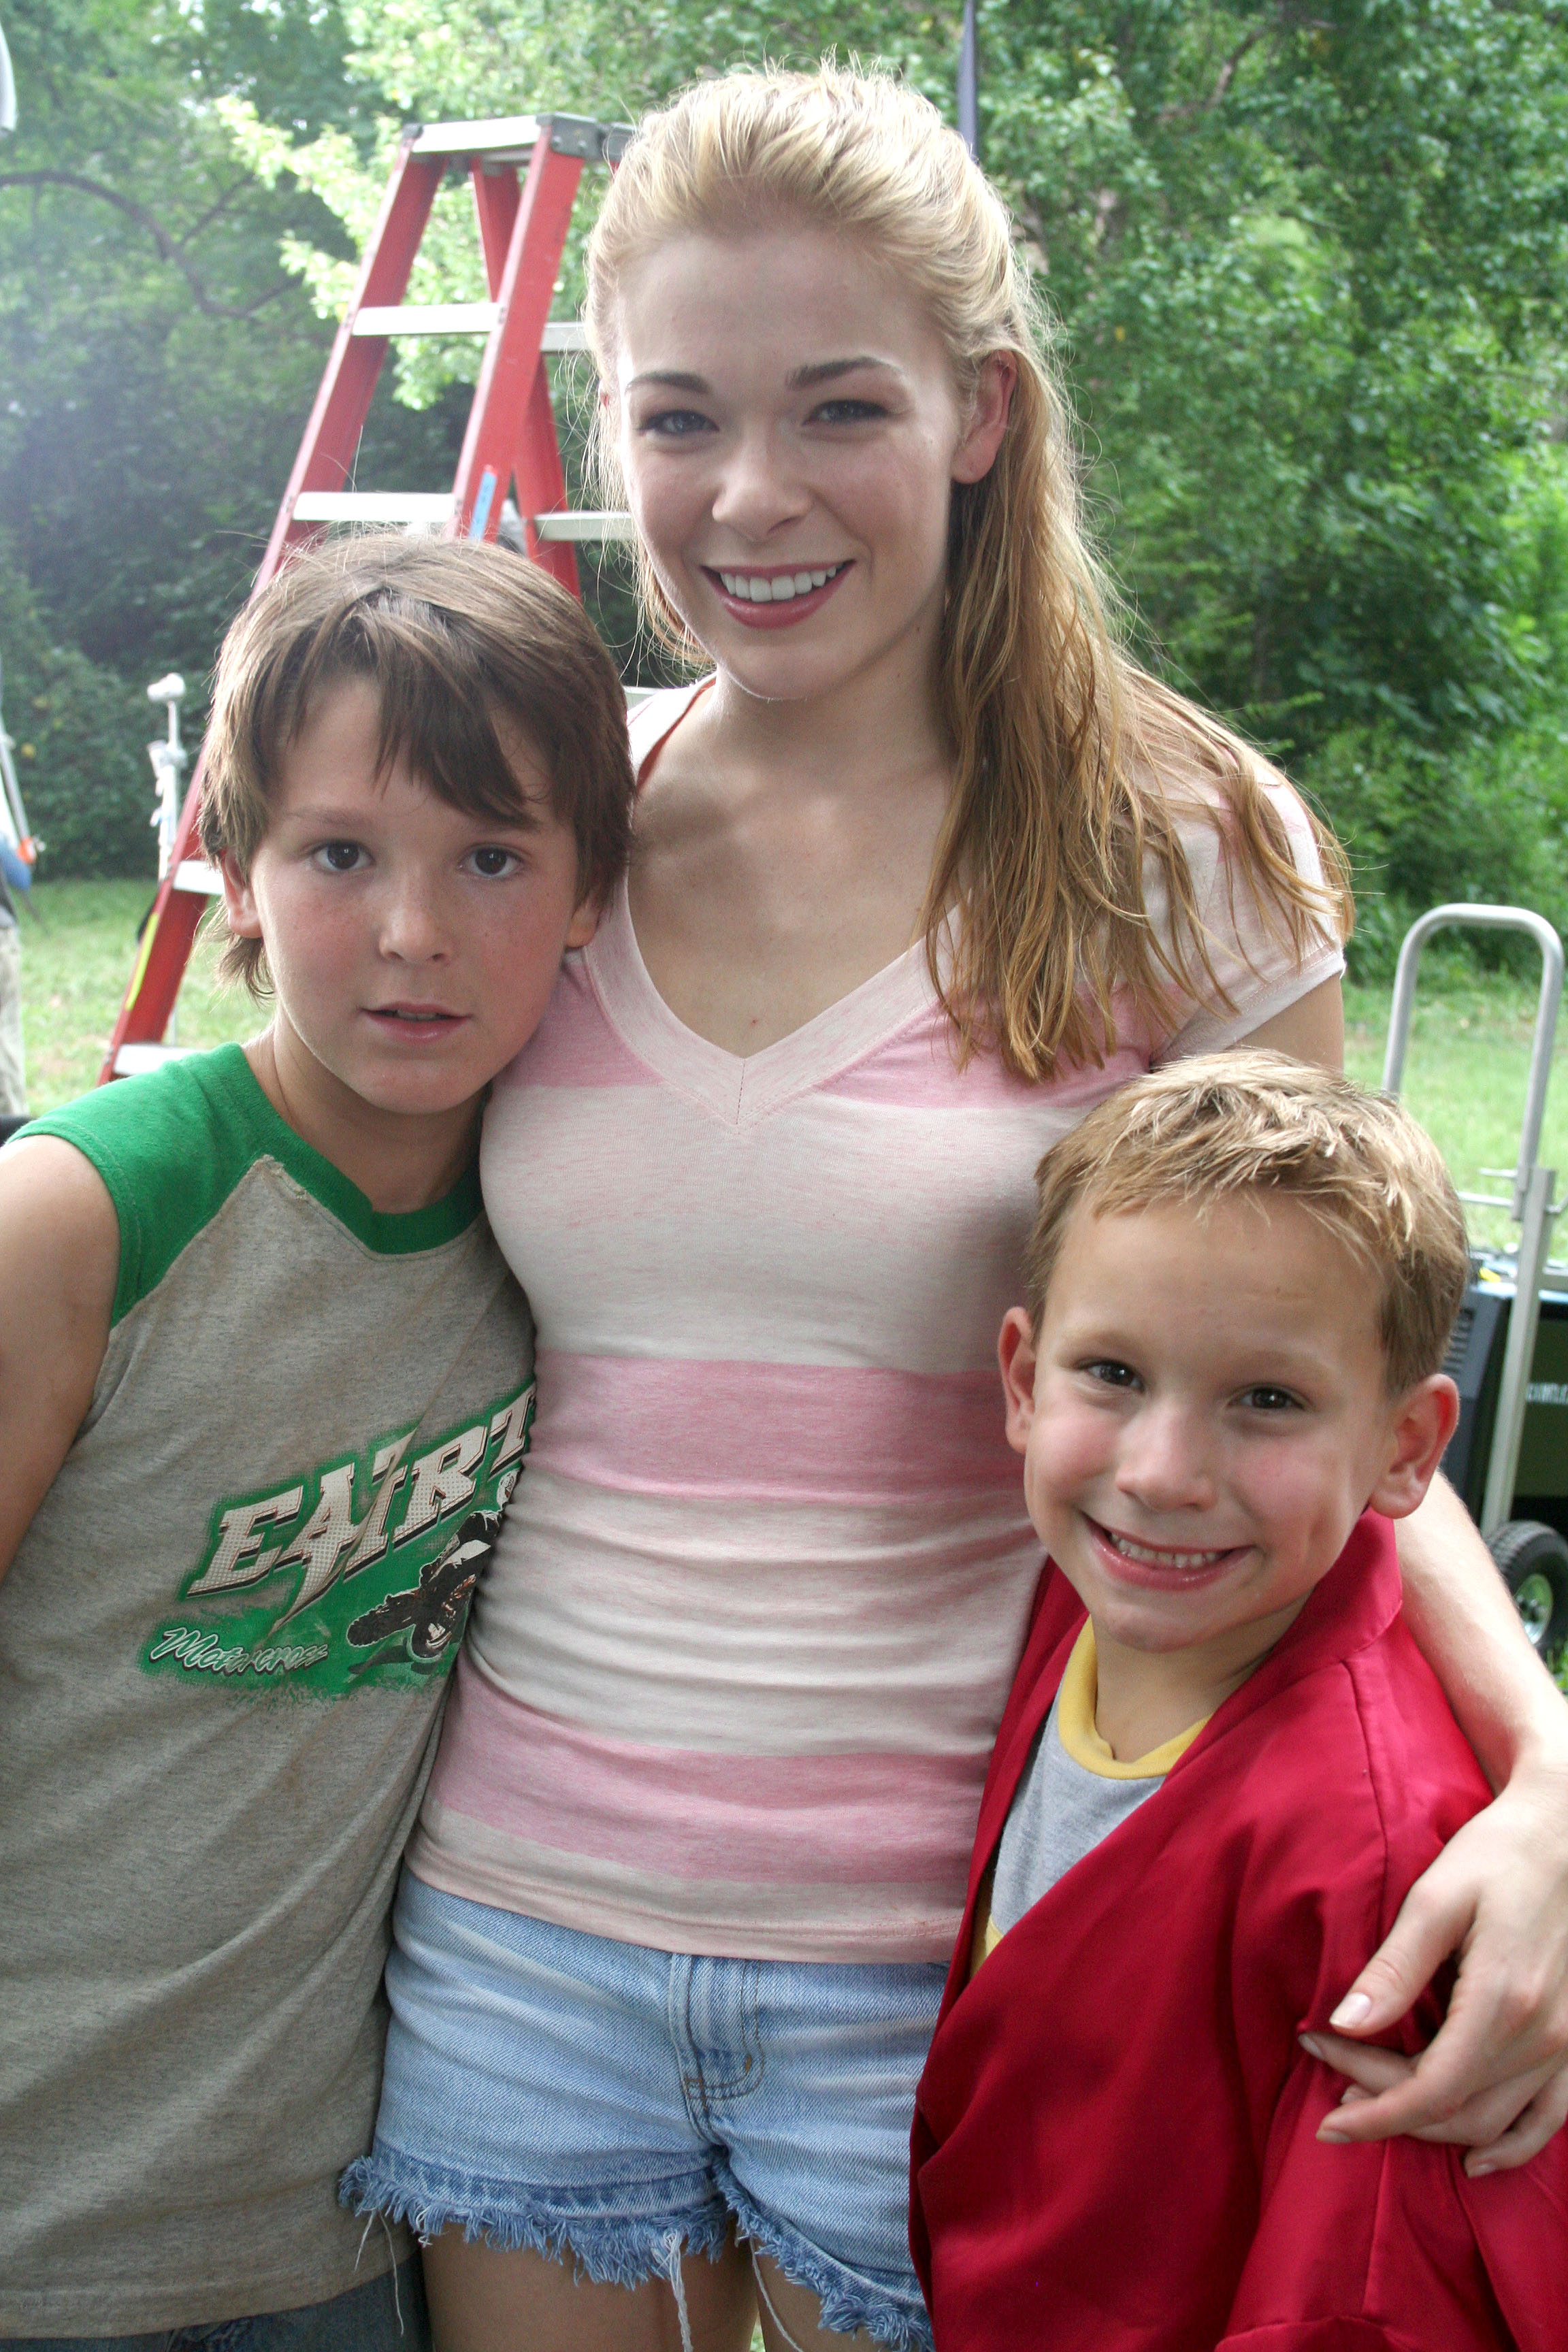 Tyler Case, Michel May, and LeAnn Rimes on the set of Good Intentions